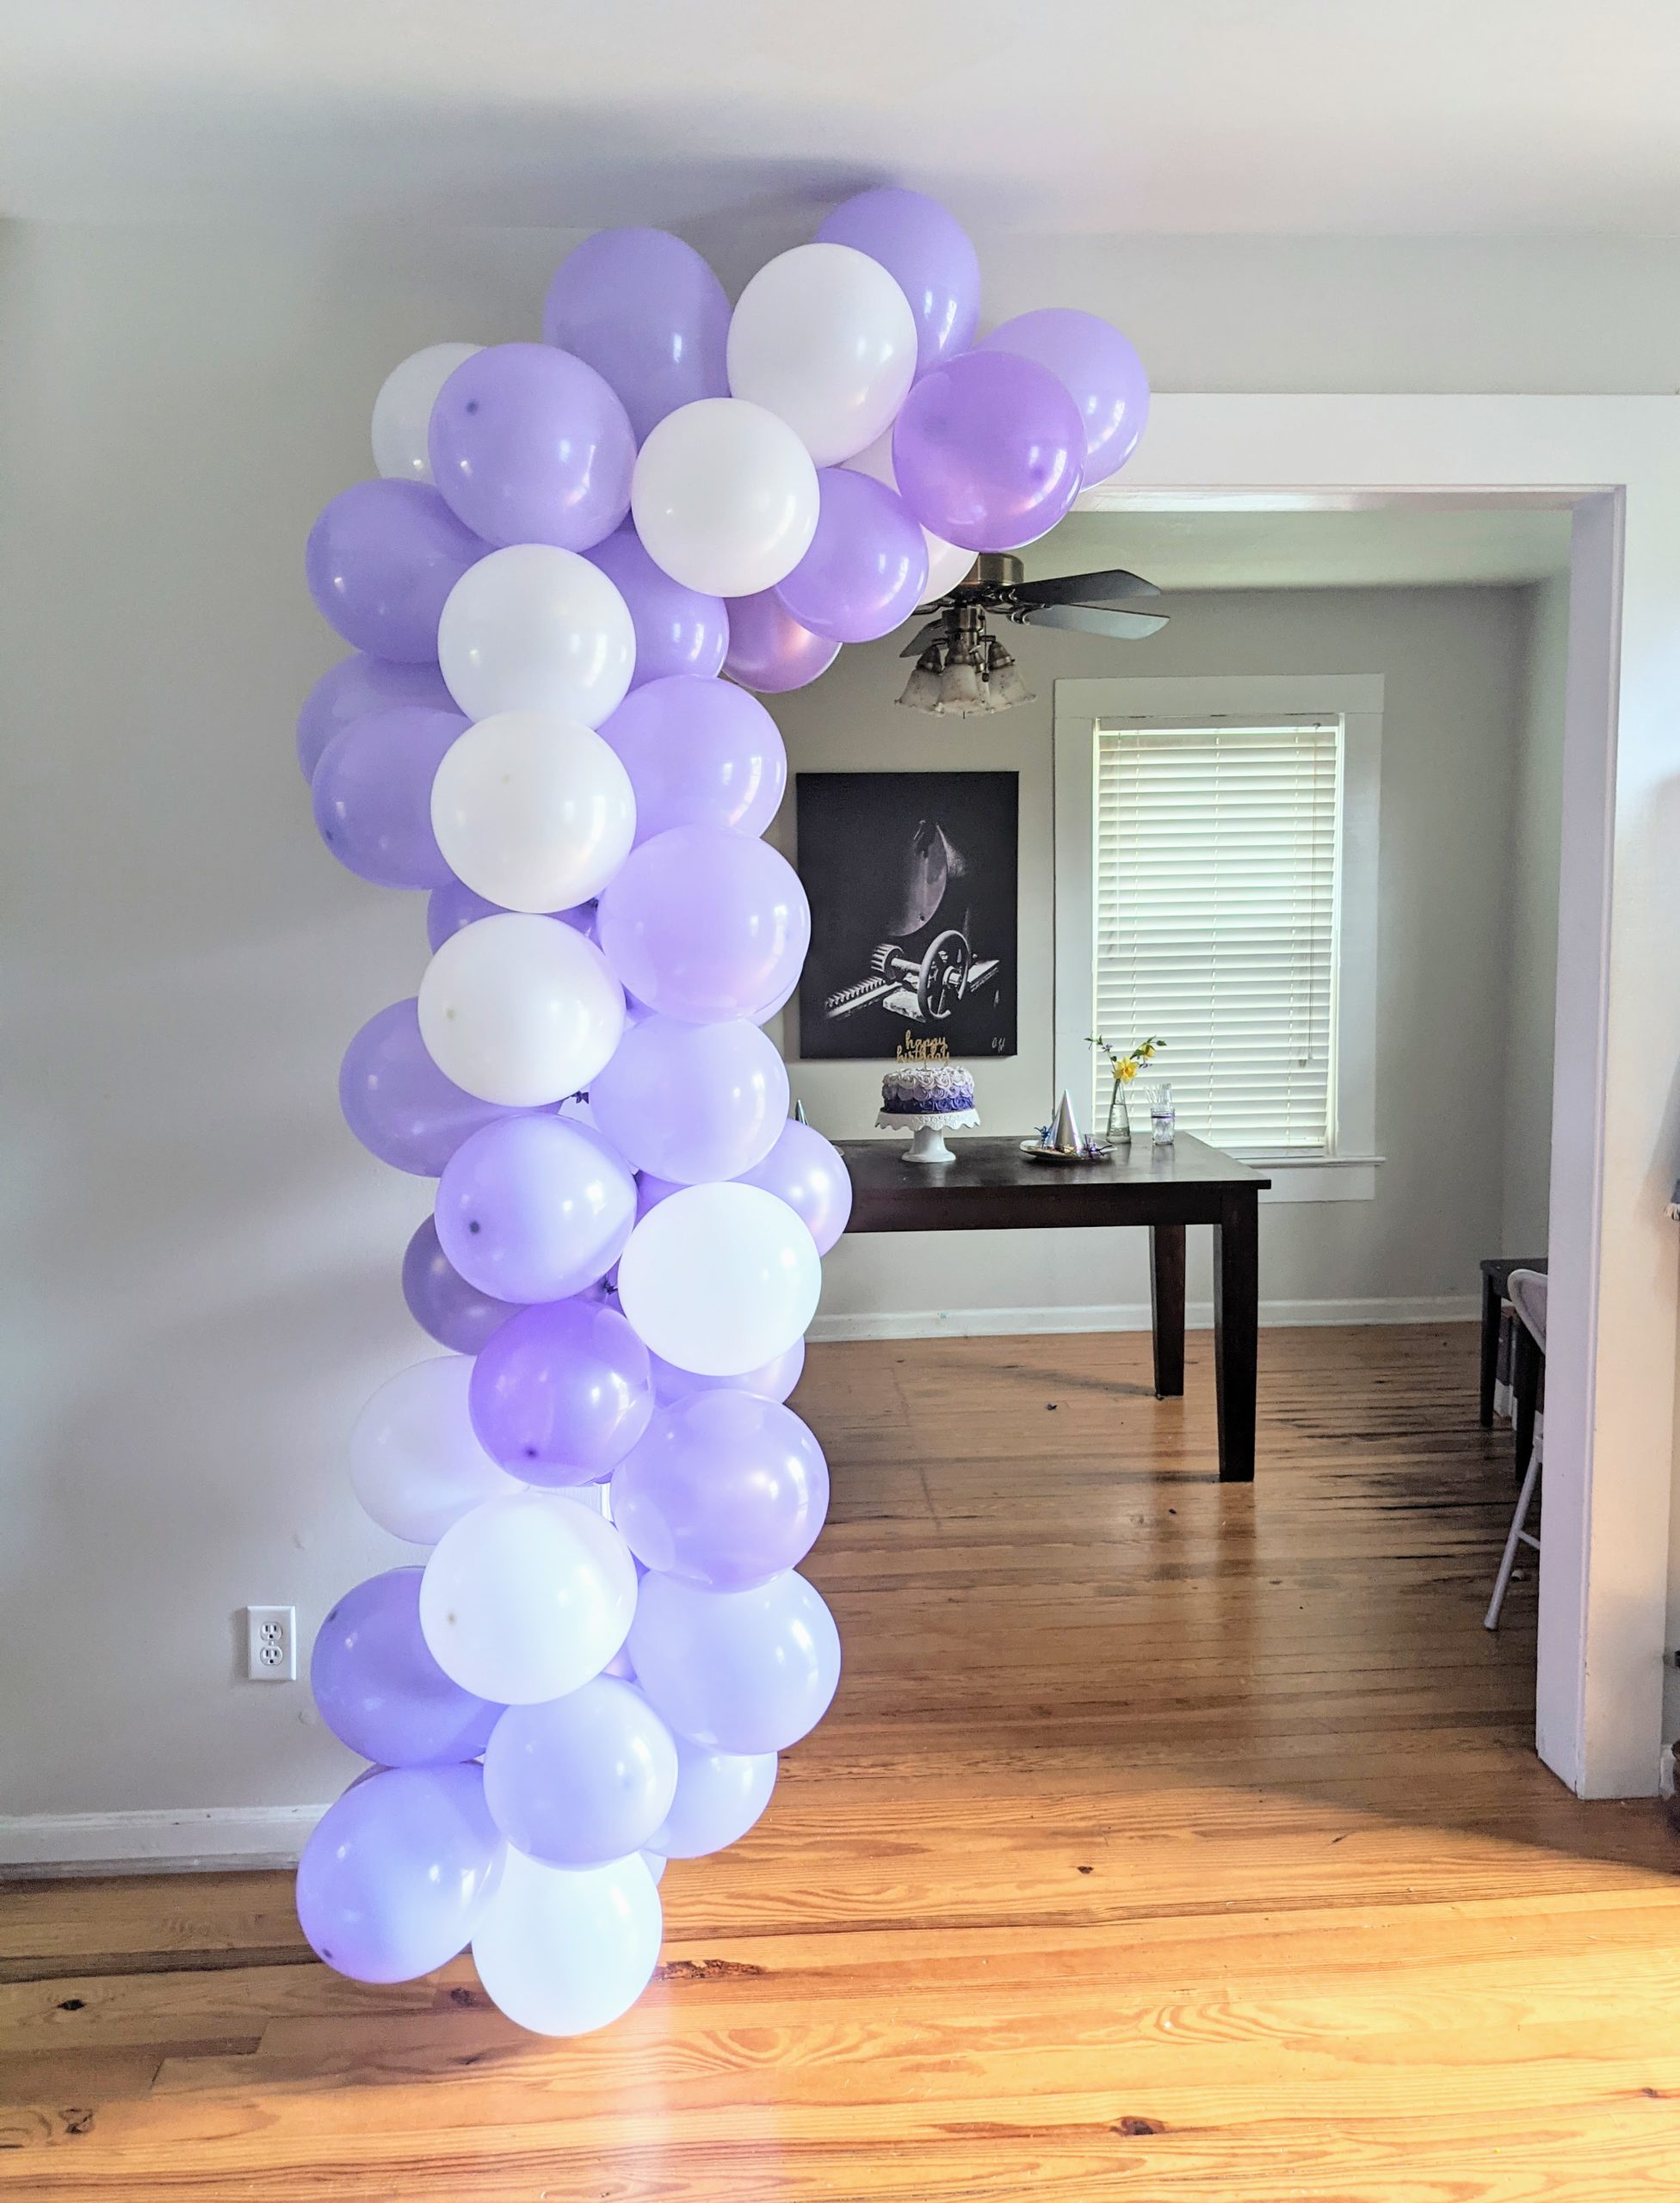 How to Make A Balloon Garland - Easy Tutorial for Beginners